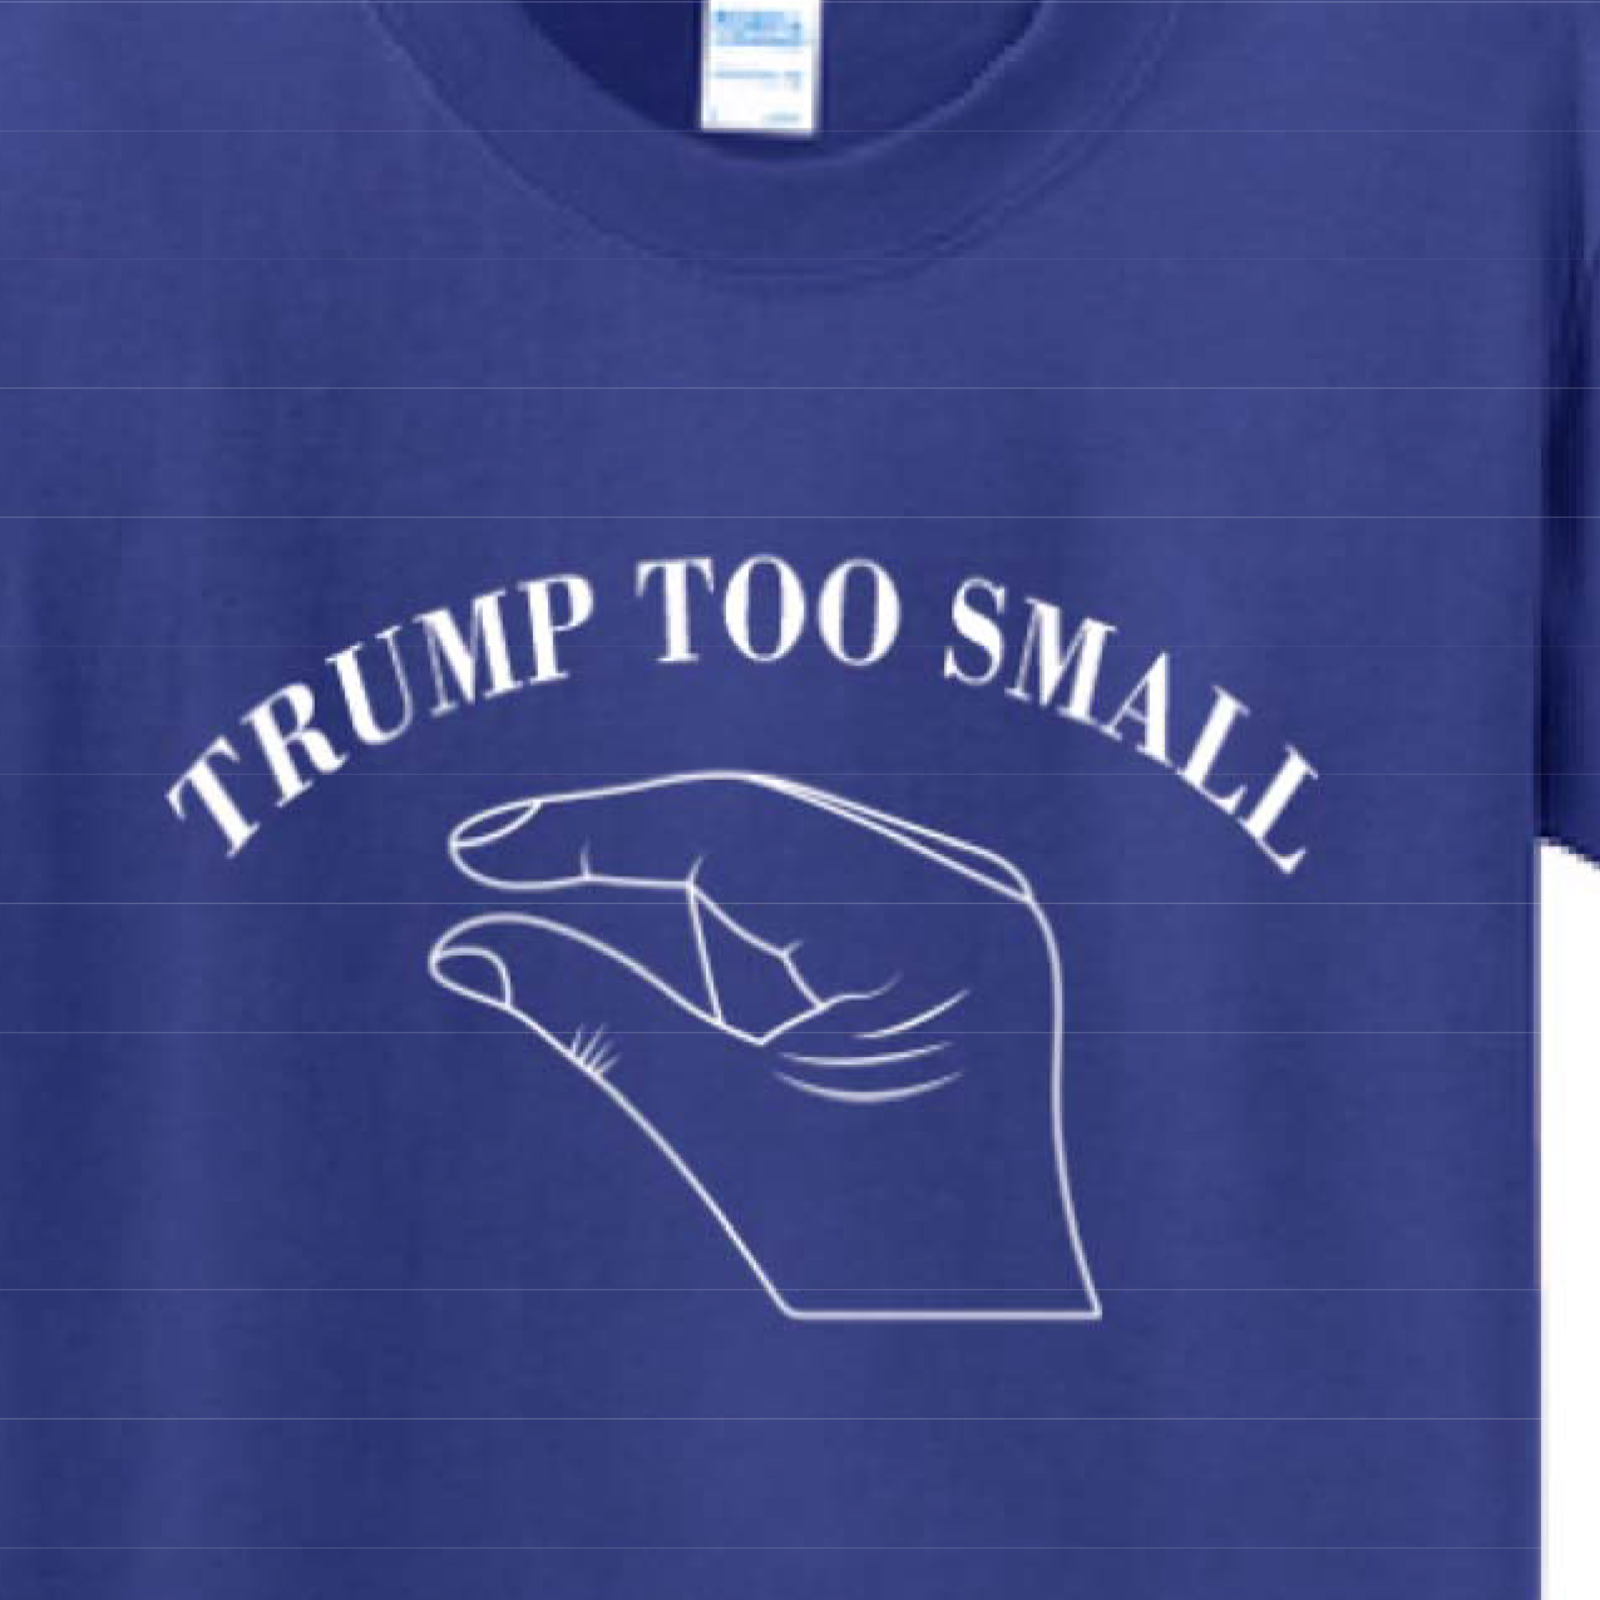 Supreme Court to decide if a California man should be able to trademark the  phrase “Trump too small”